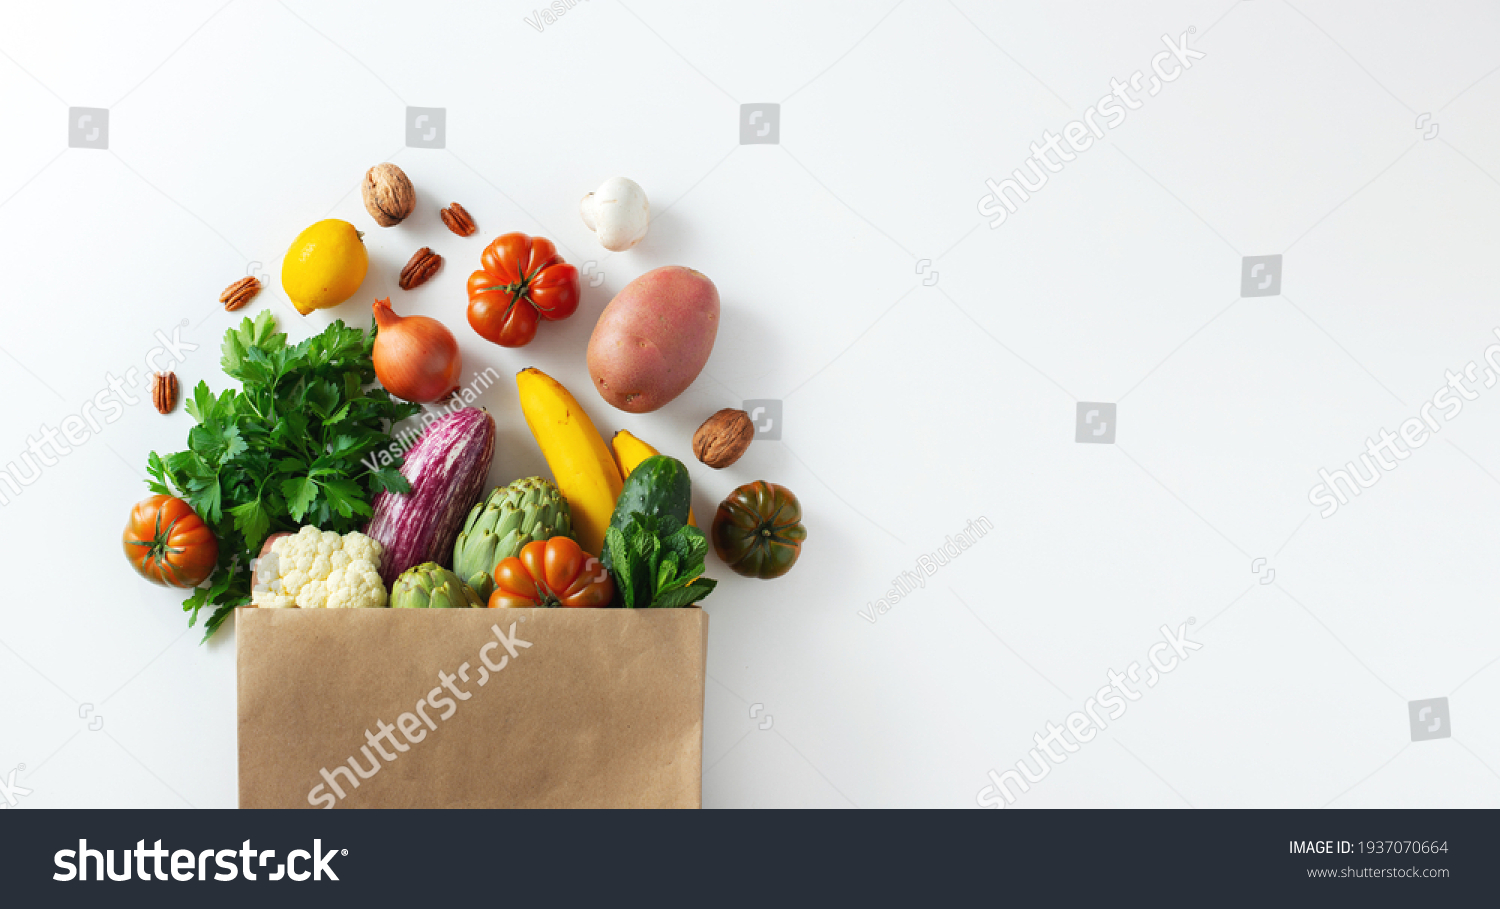 Delivery healthy food background. Healthy vegan vegetarian food in paper bag vegetables and fruits on white, copy space, banner. Shopping food supermarket and clean vegan eating concept. #1937070664